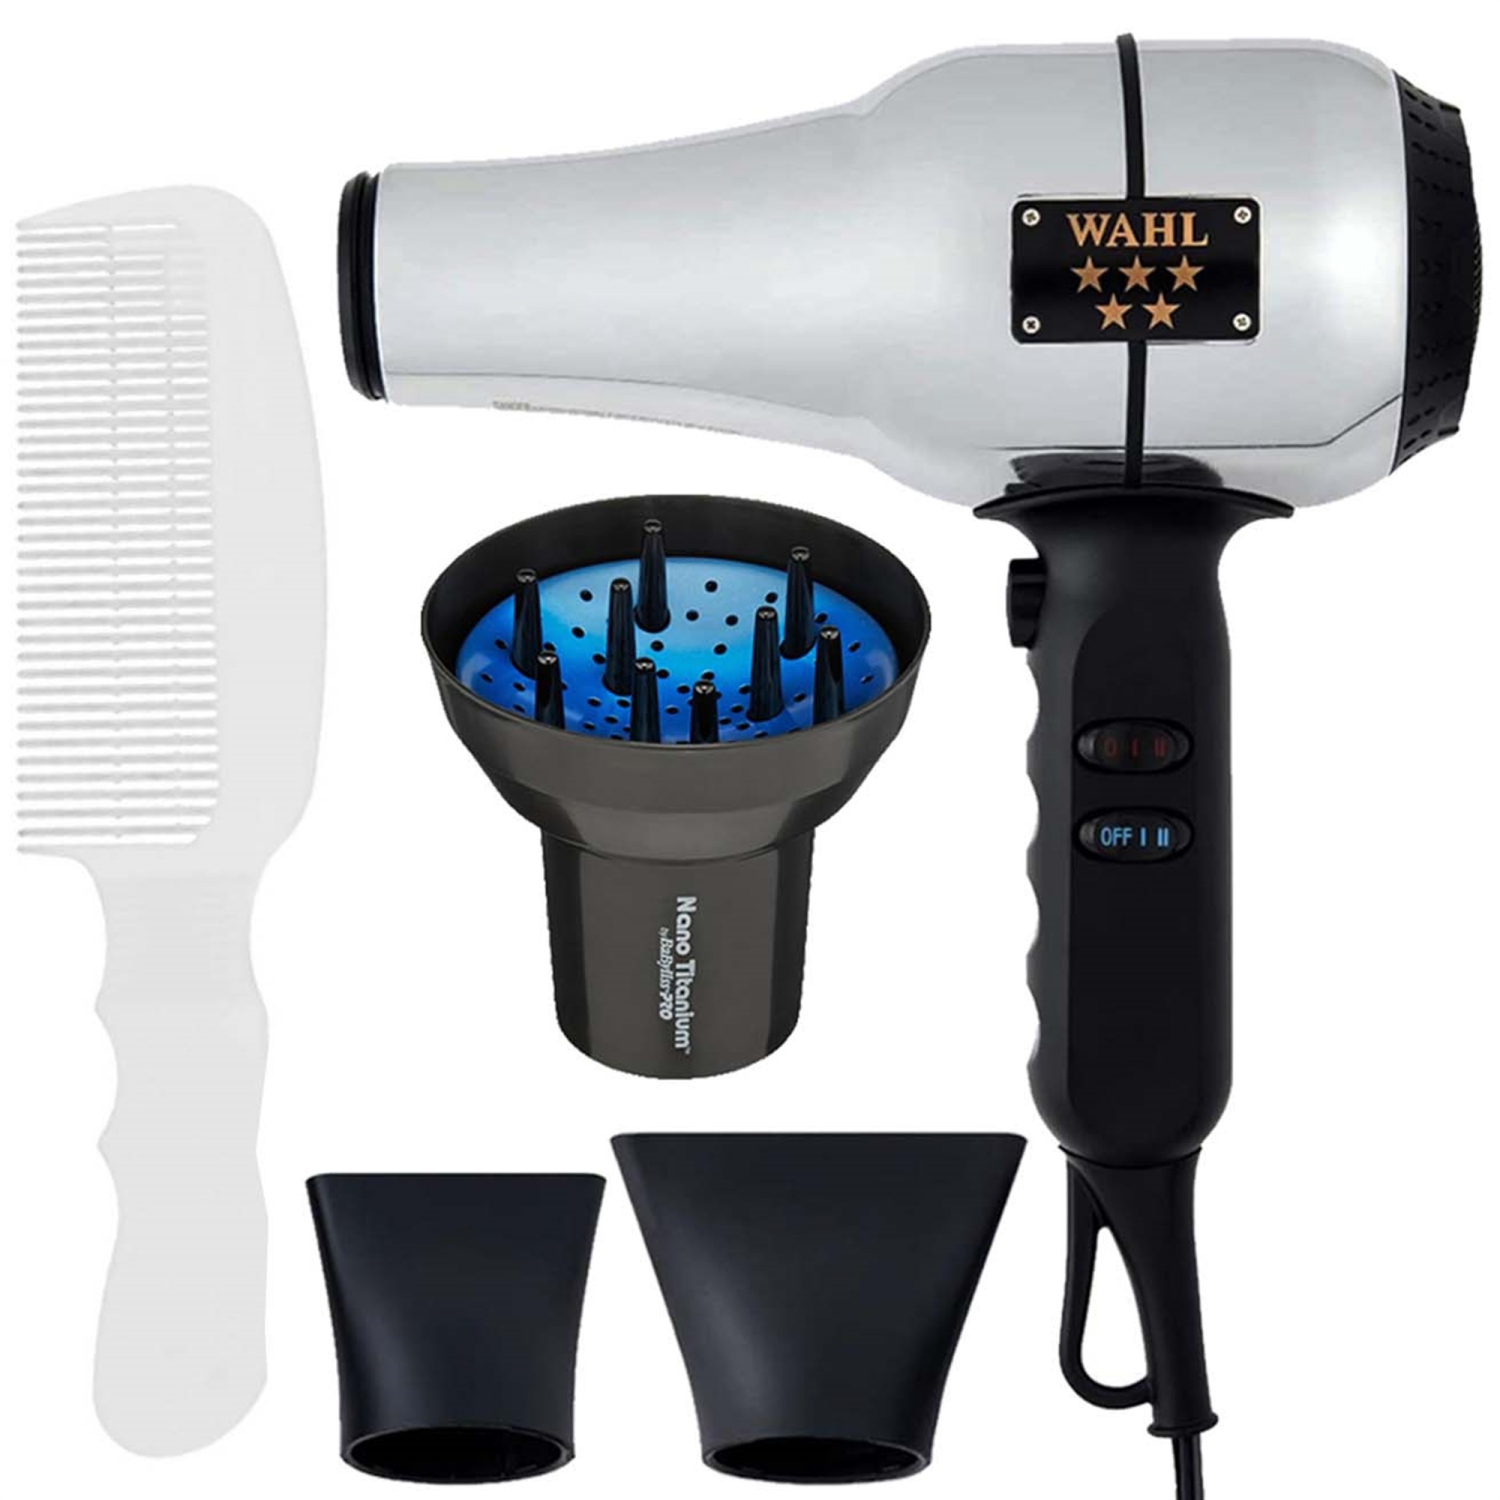 Wahl Professional 5-Star Series Ionic Hair Dryer with 2 Concentrator Nozzles Kit